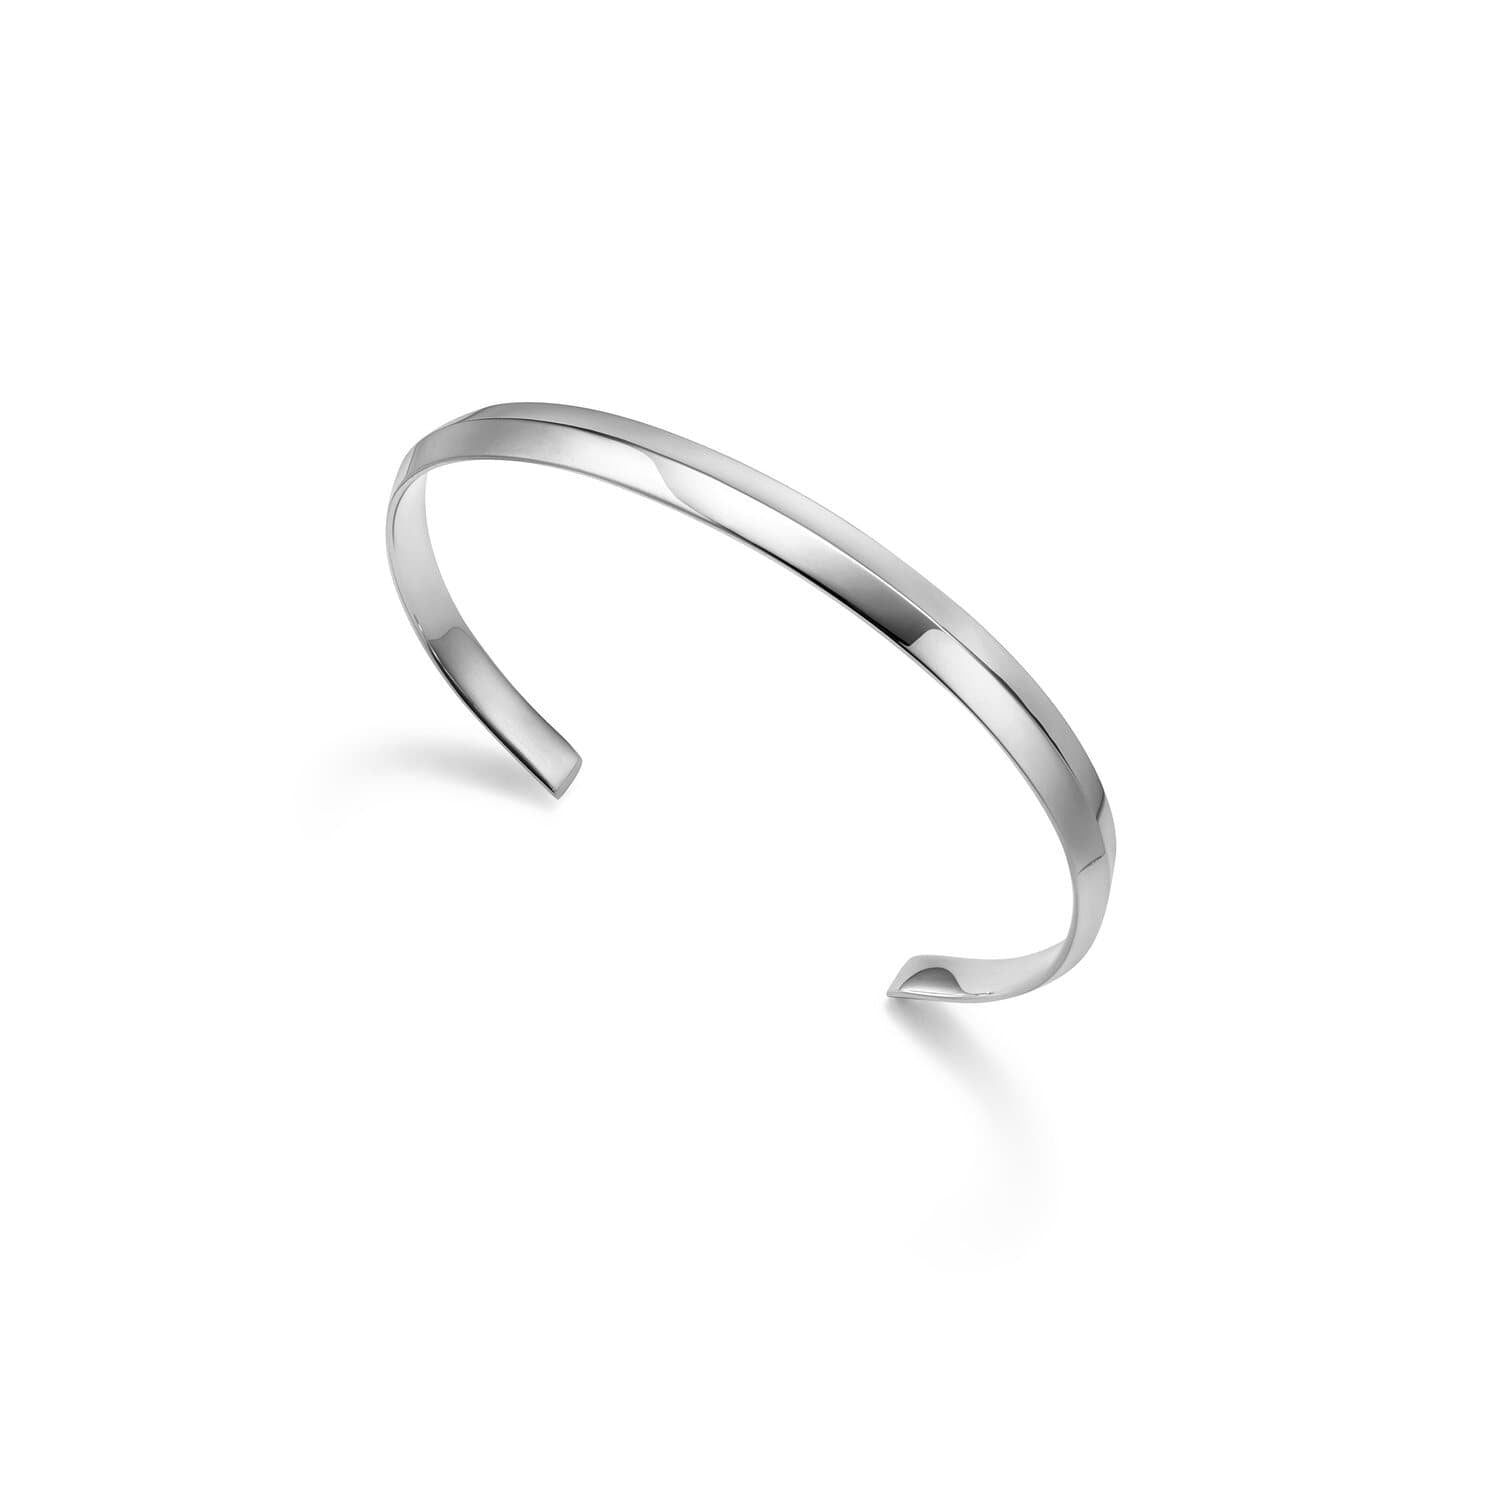 White Gold Cuff Bracelet Made with Eco-Friendly Gold